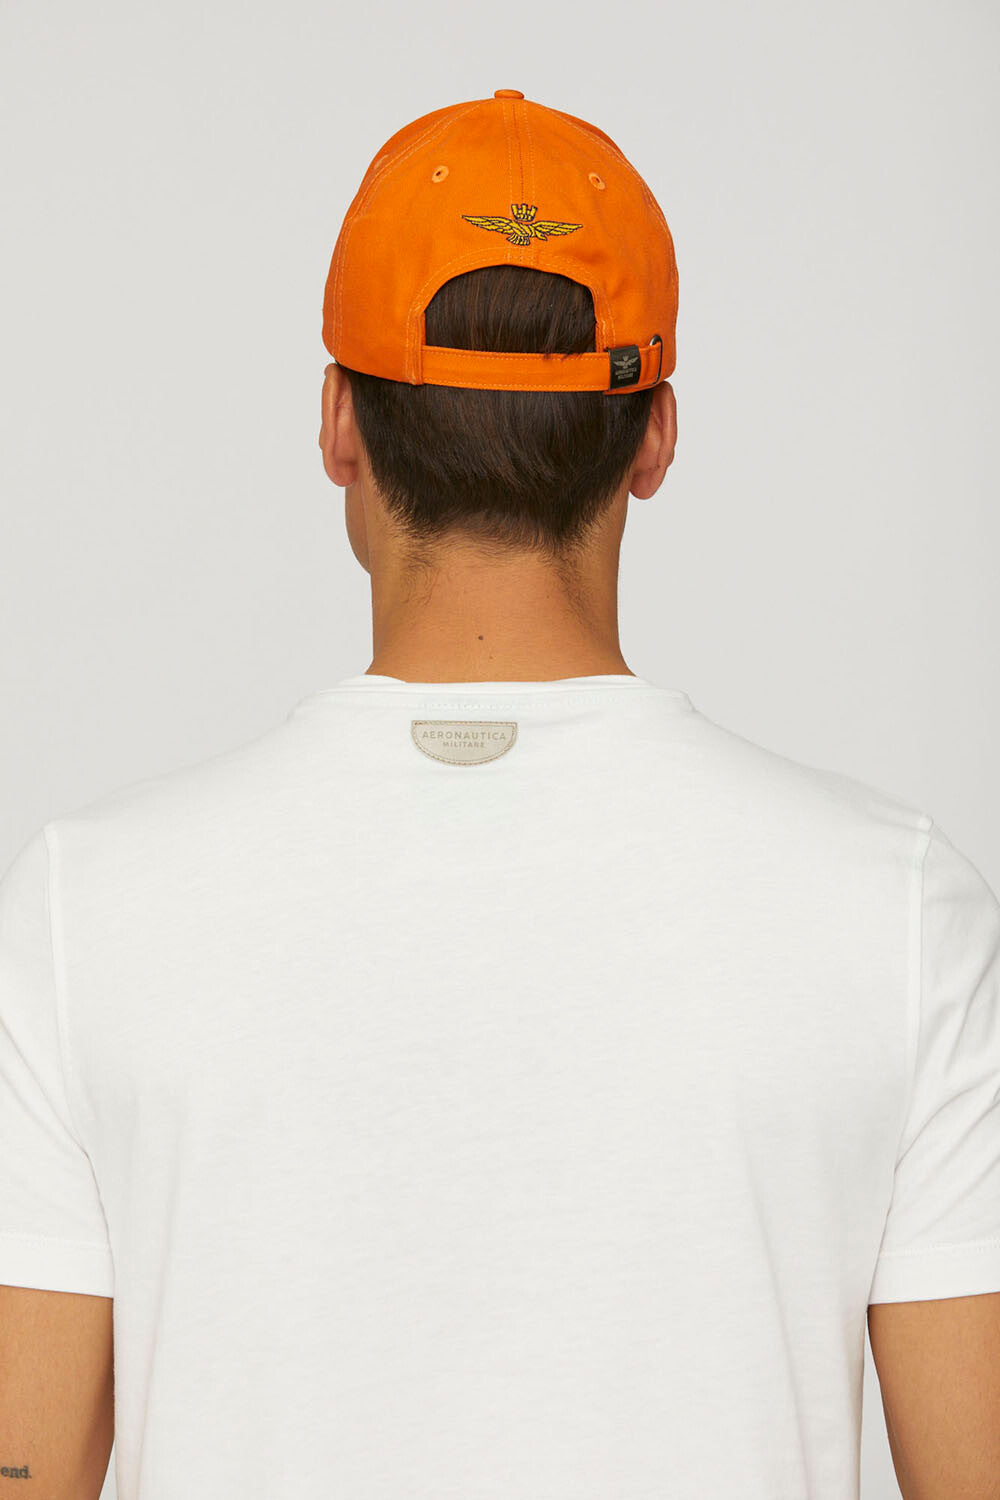 PAN 1961 embroidered cap